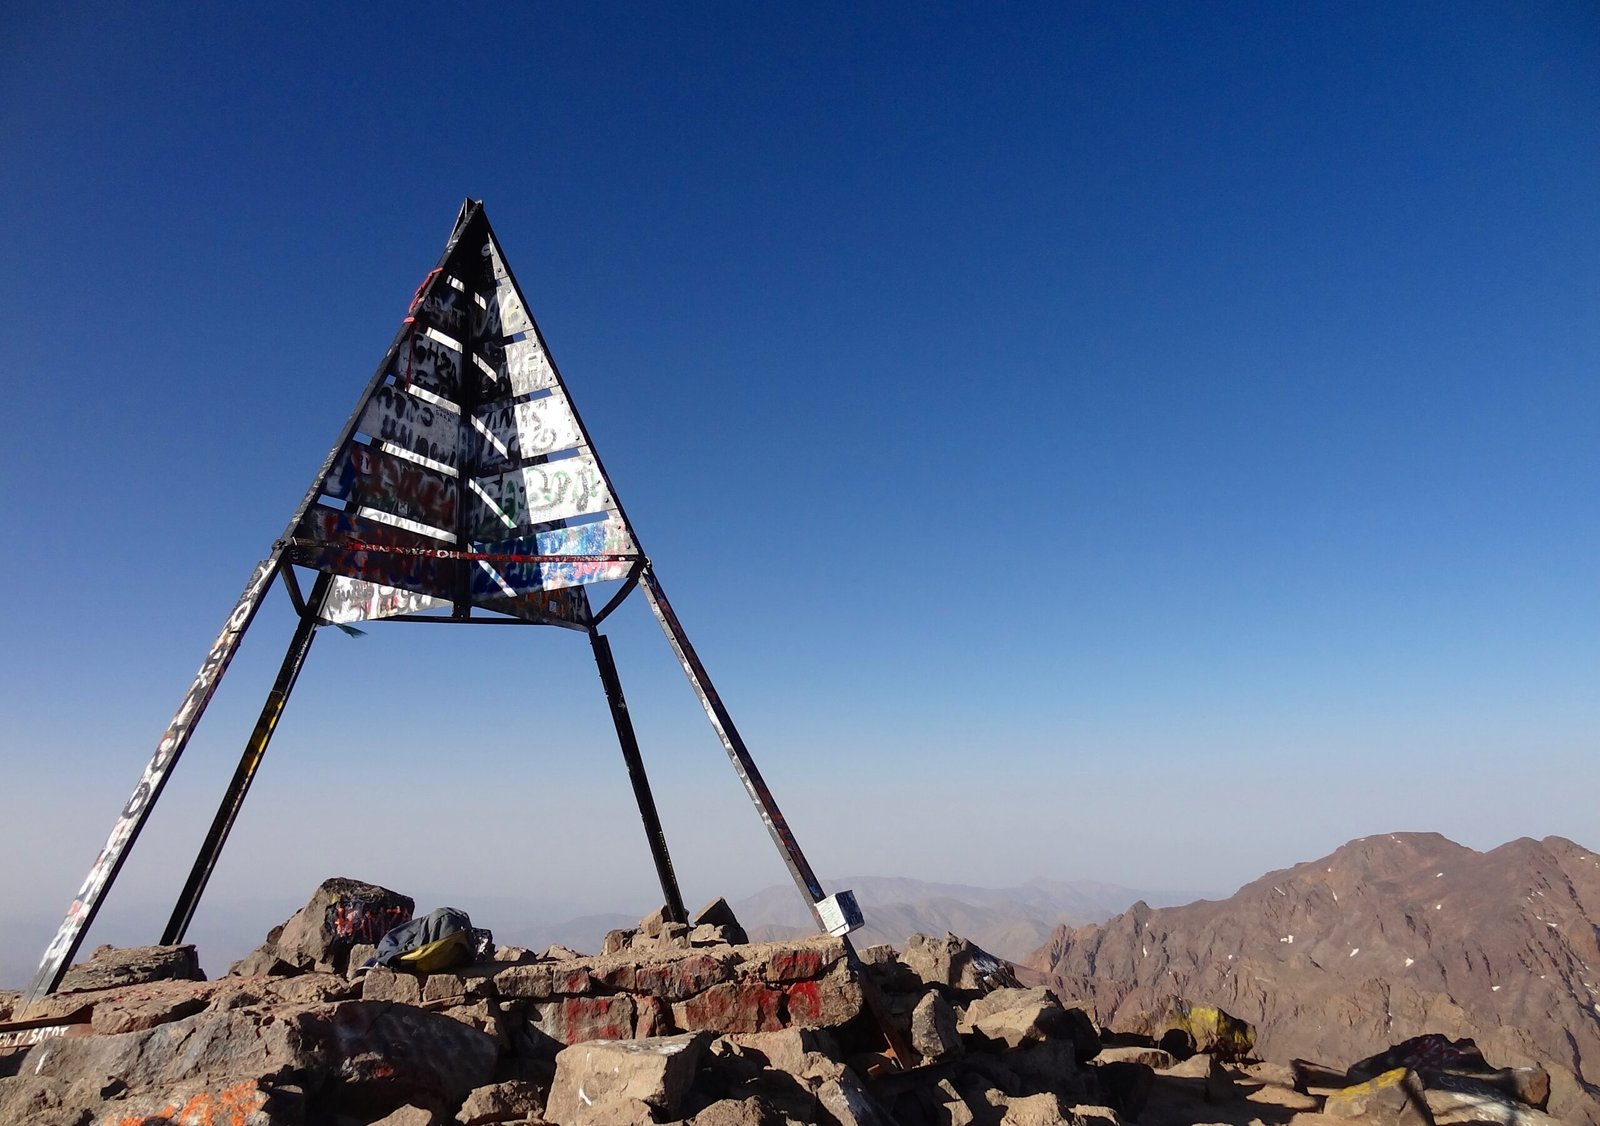 Do I need any special gear for Mount Toubkal